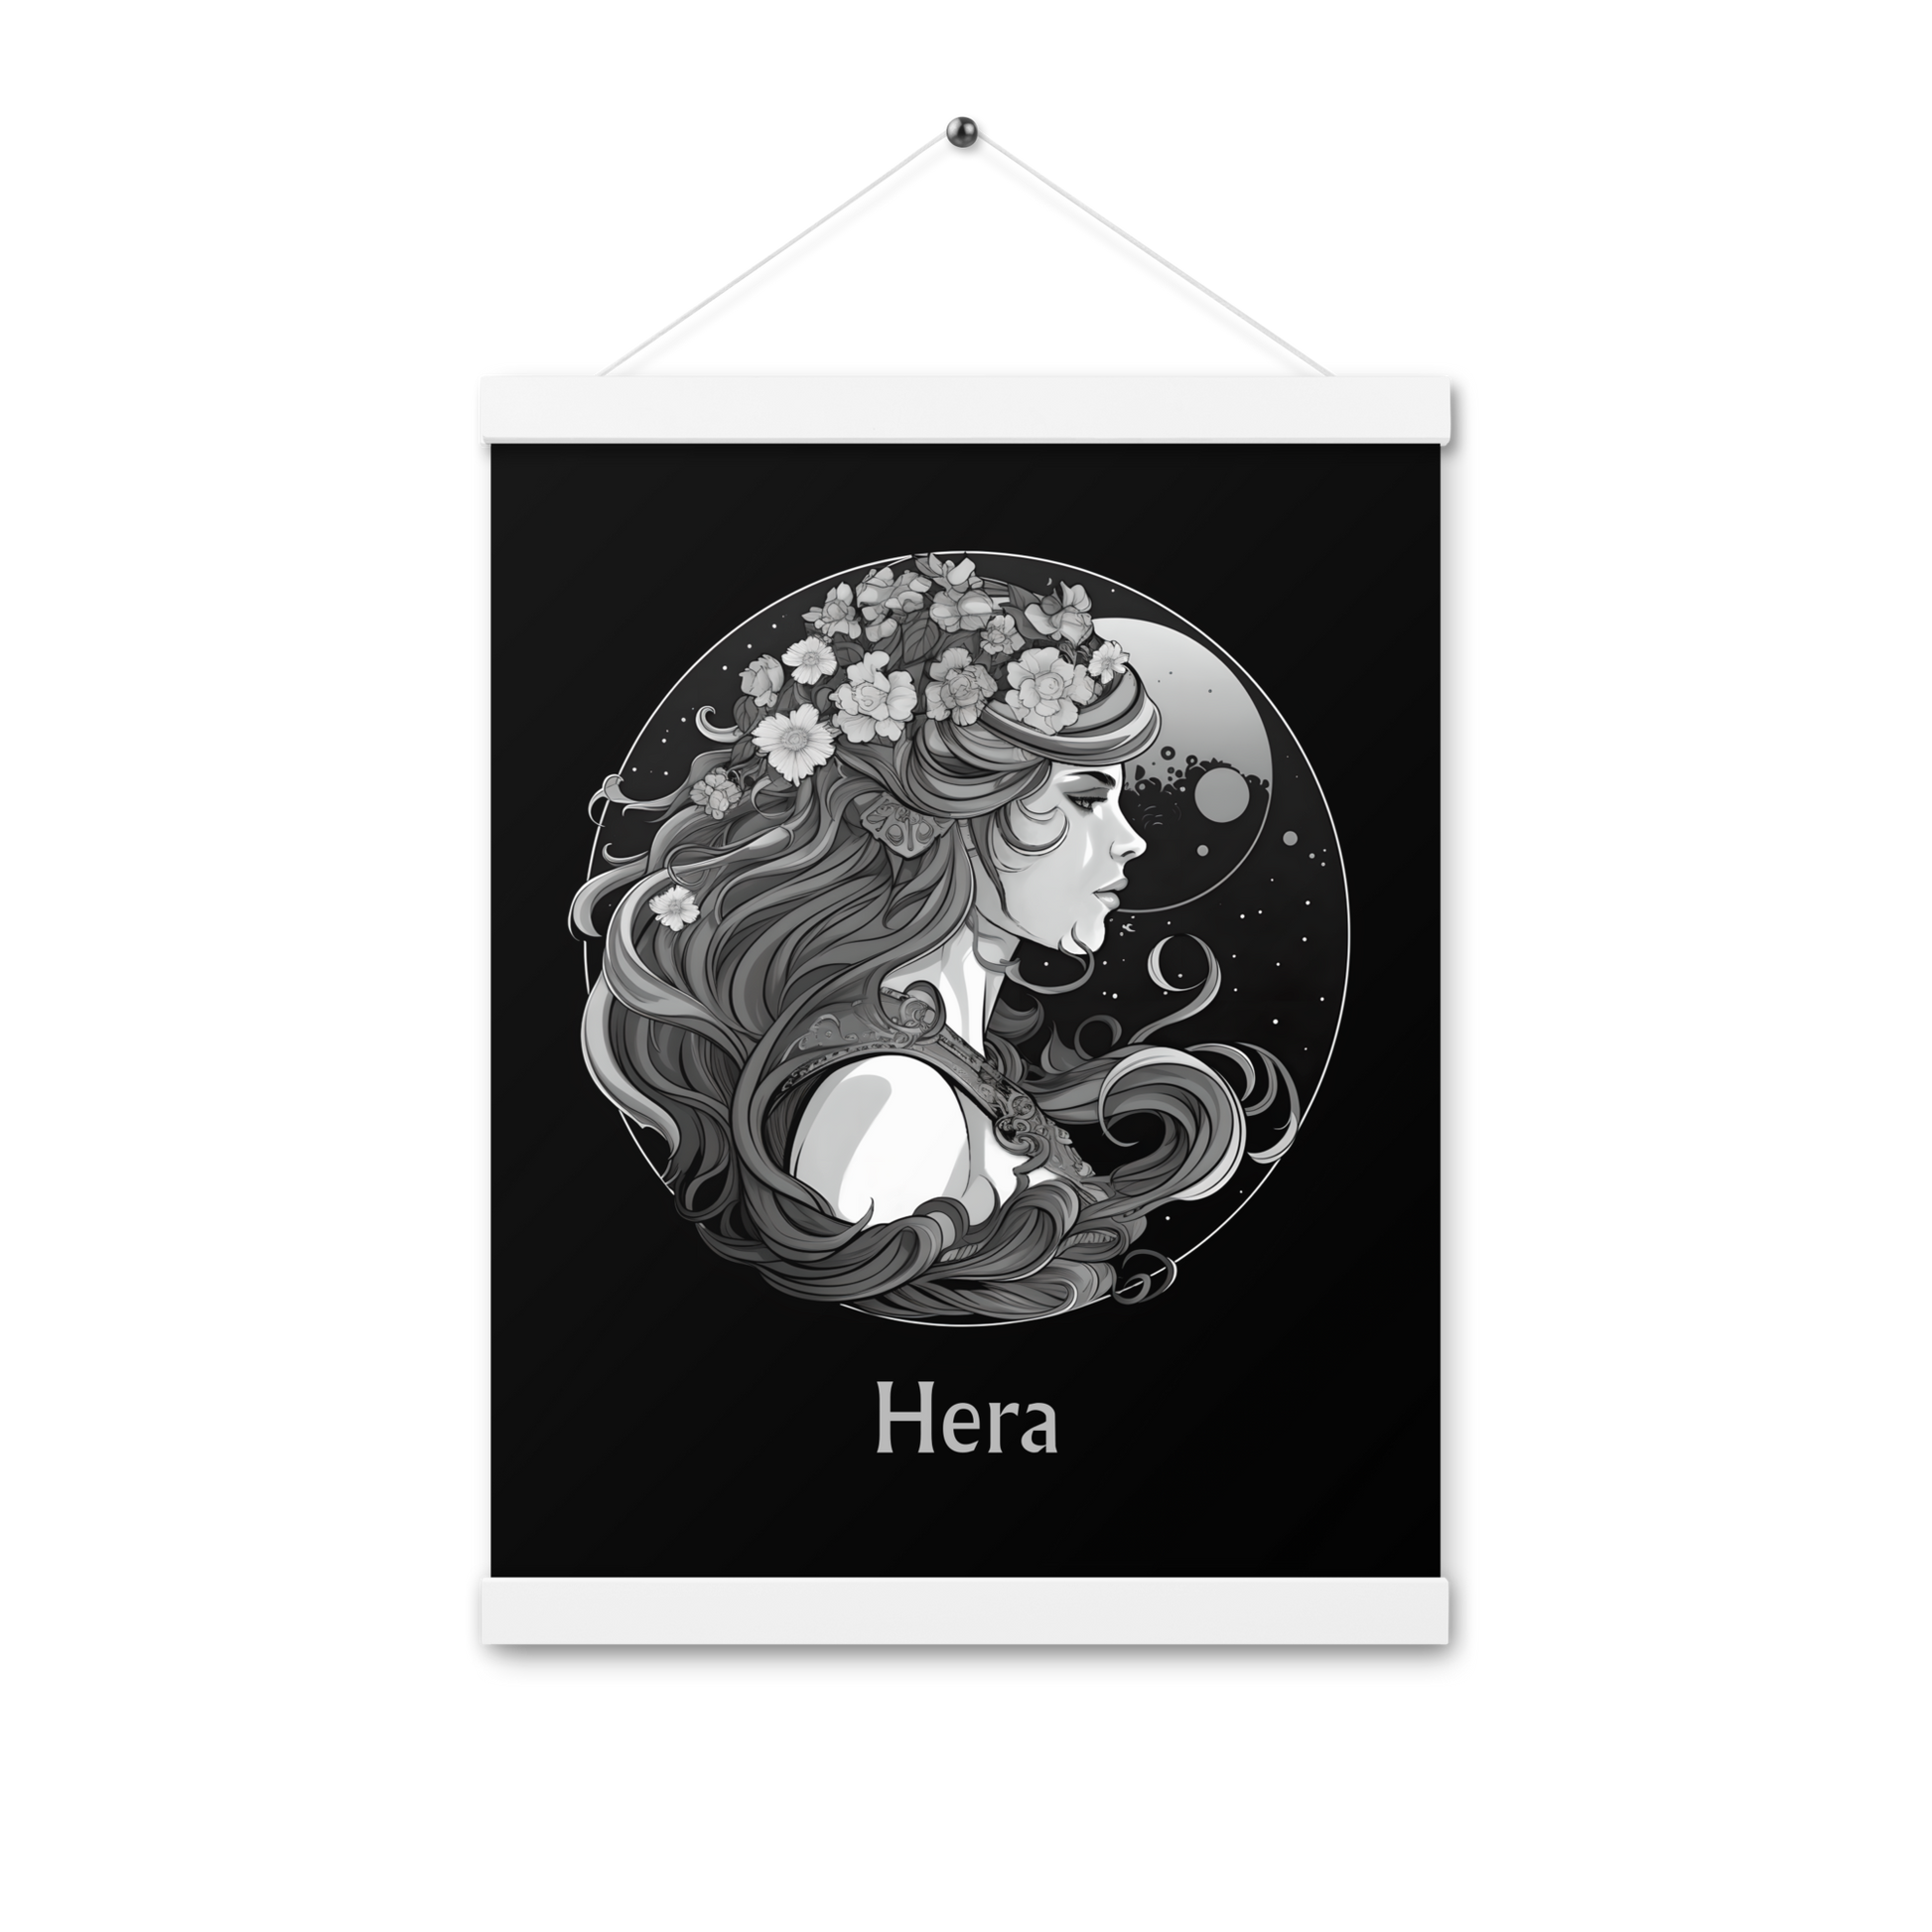 Hera's Devotion - Black and White Hanging Wall Art High Quality Matte Poster DrawDadDraw